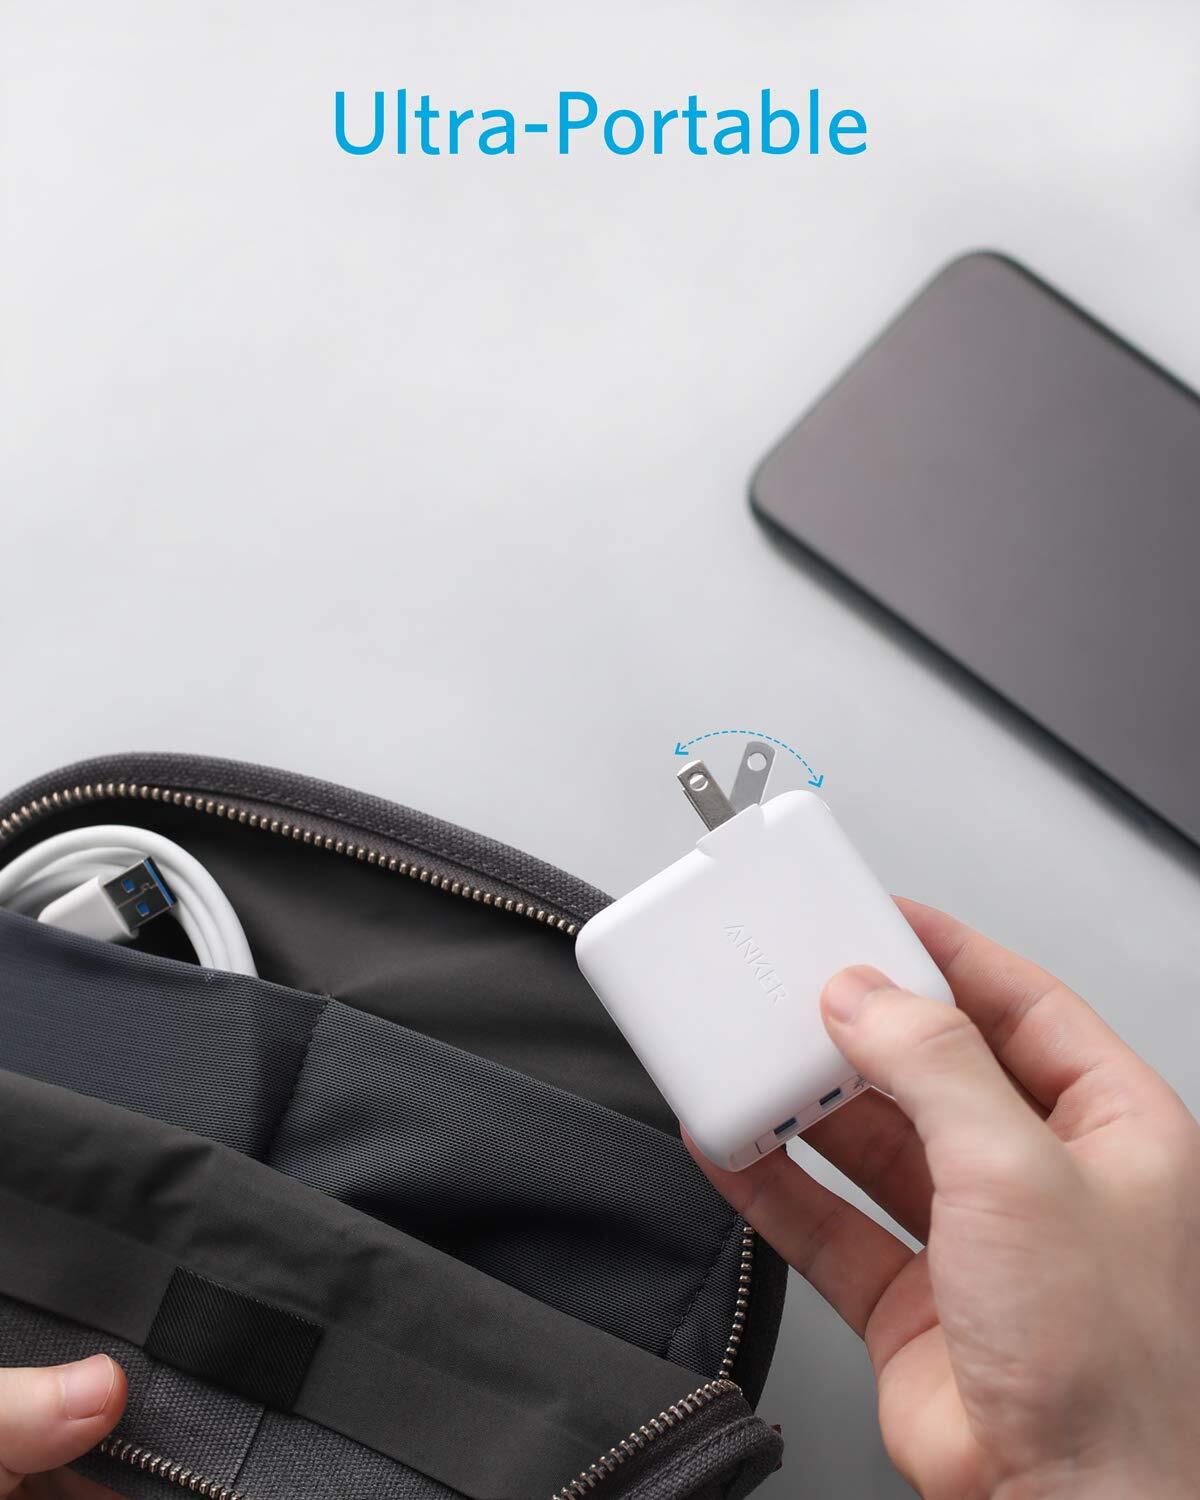 Anker PowerPort II with Dual PowerIQ Ports, 24W-Ultra-Compact Foldable Plug Travel Charger, for iPhone X/8/7/6S/6 Plus, iPad Pro/Air 2/mini 4, Samsung S5, and More-M000000000453 www.mysocially.com